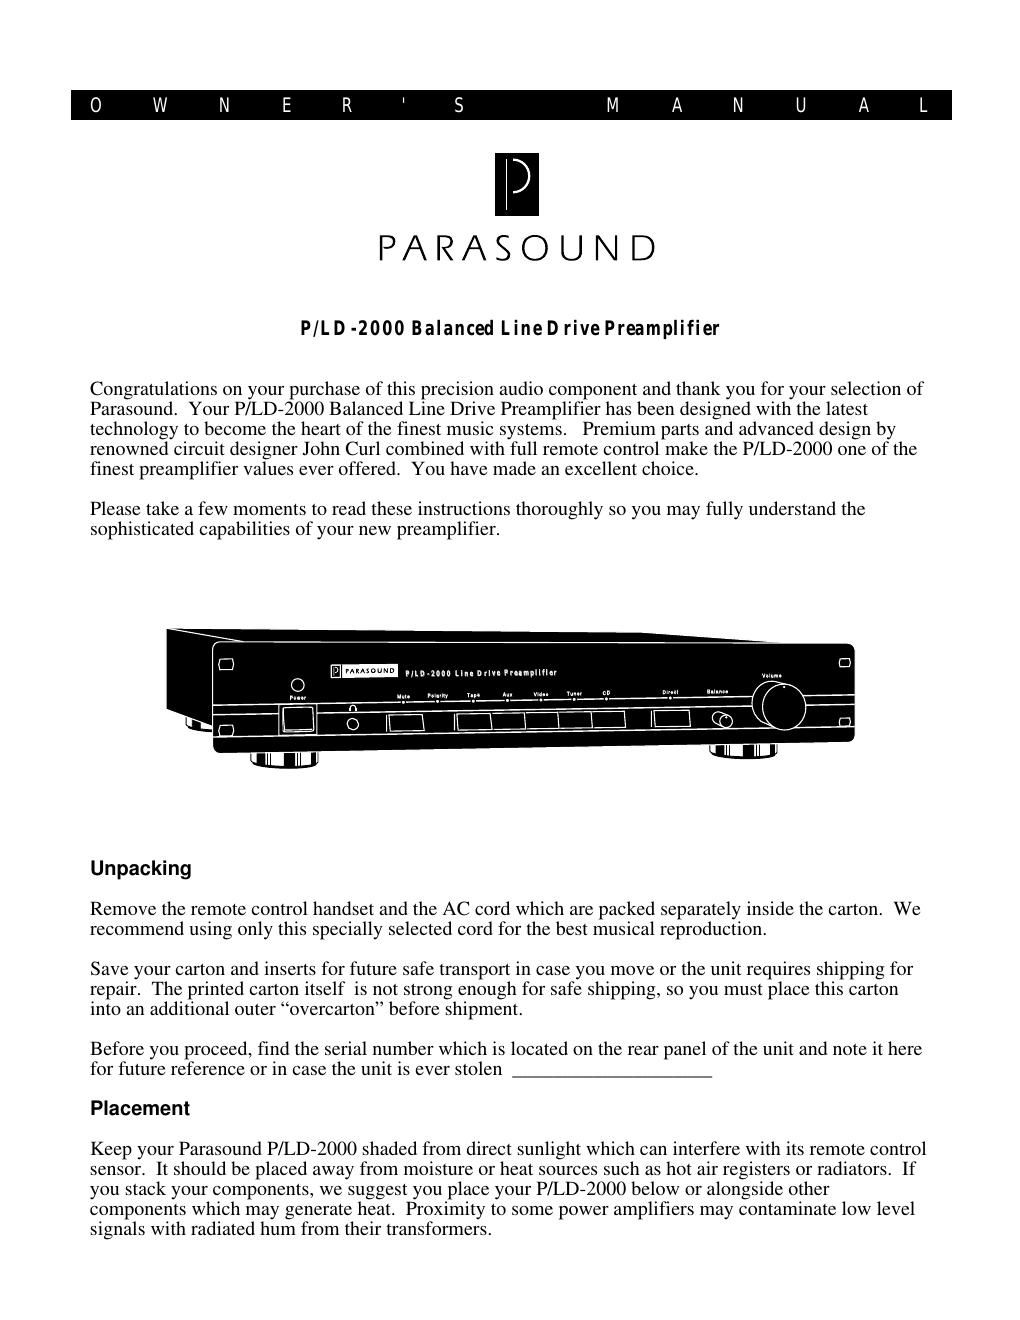 parasound pld 2000 owners manual